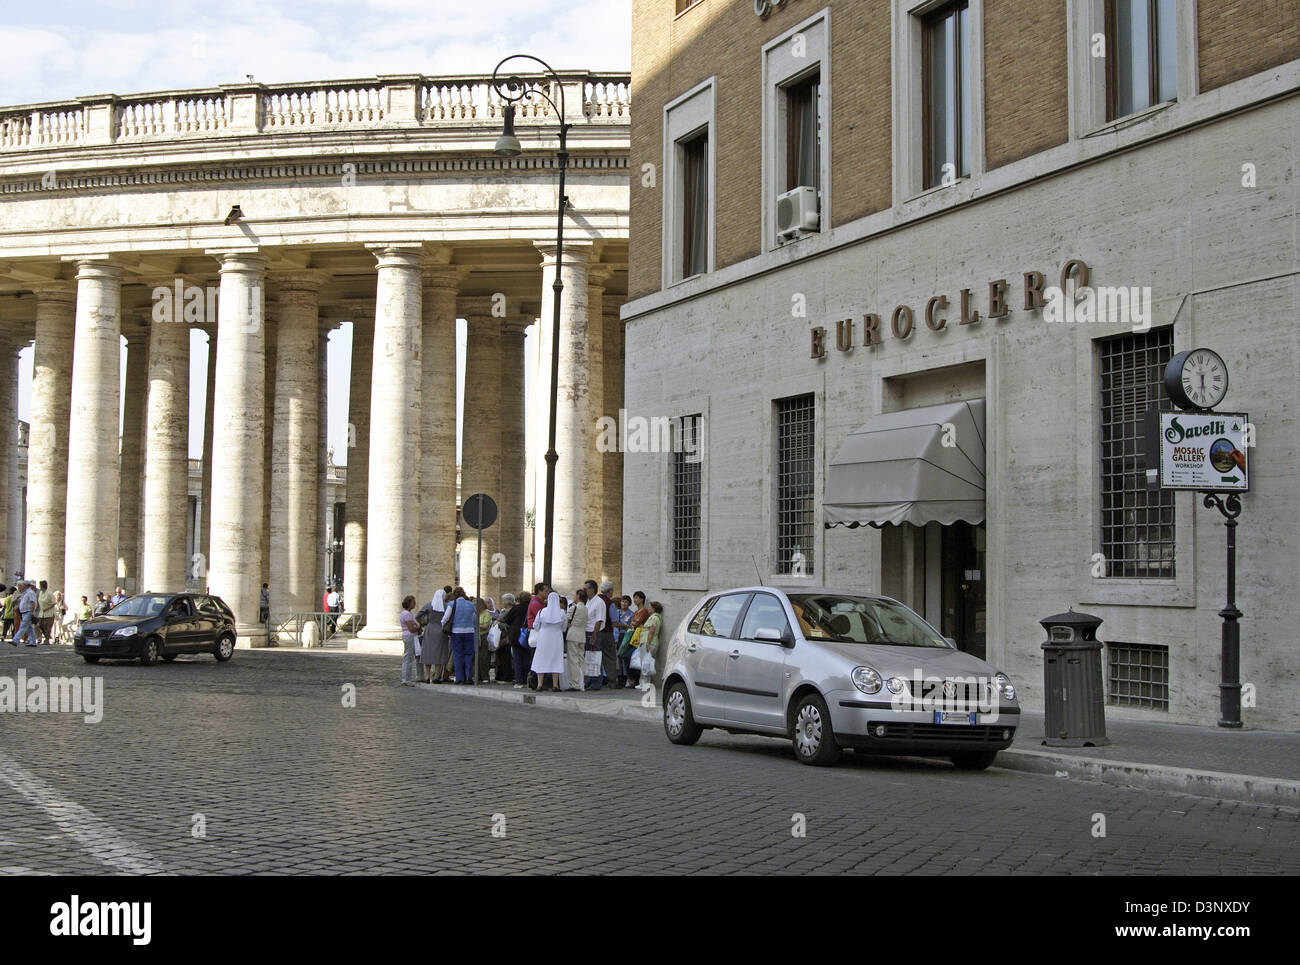 The picture shows the entrance area of Euroclero, a shop for clerical clothes, in which Pope Benedict XVI. is a customer in Rome, Italy, Thursday, 04 May 2006. Photo: Lars Halbauer Stock Photo